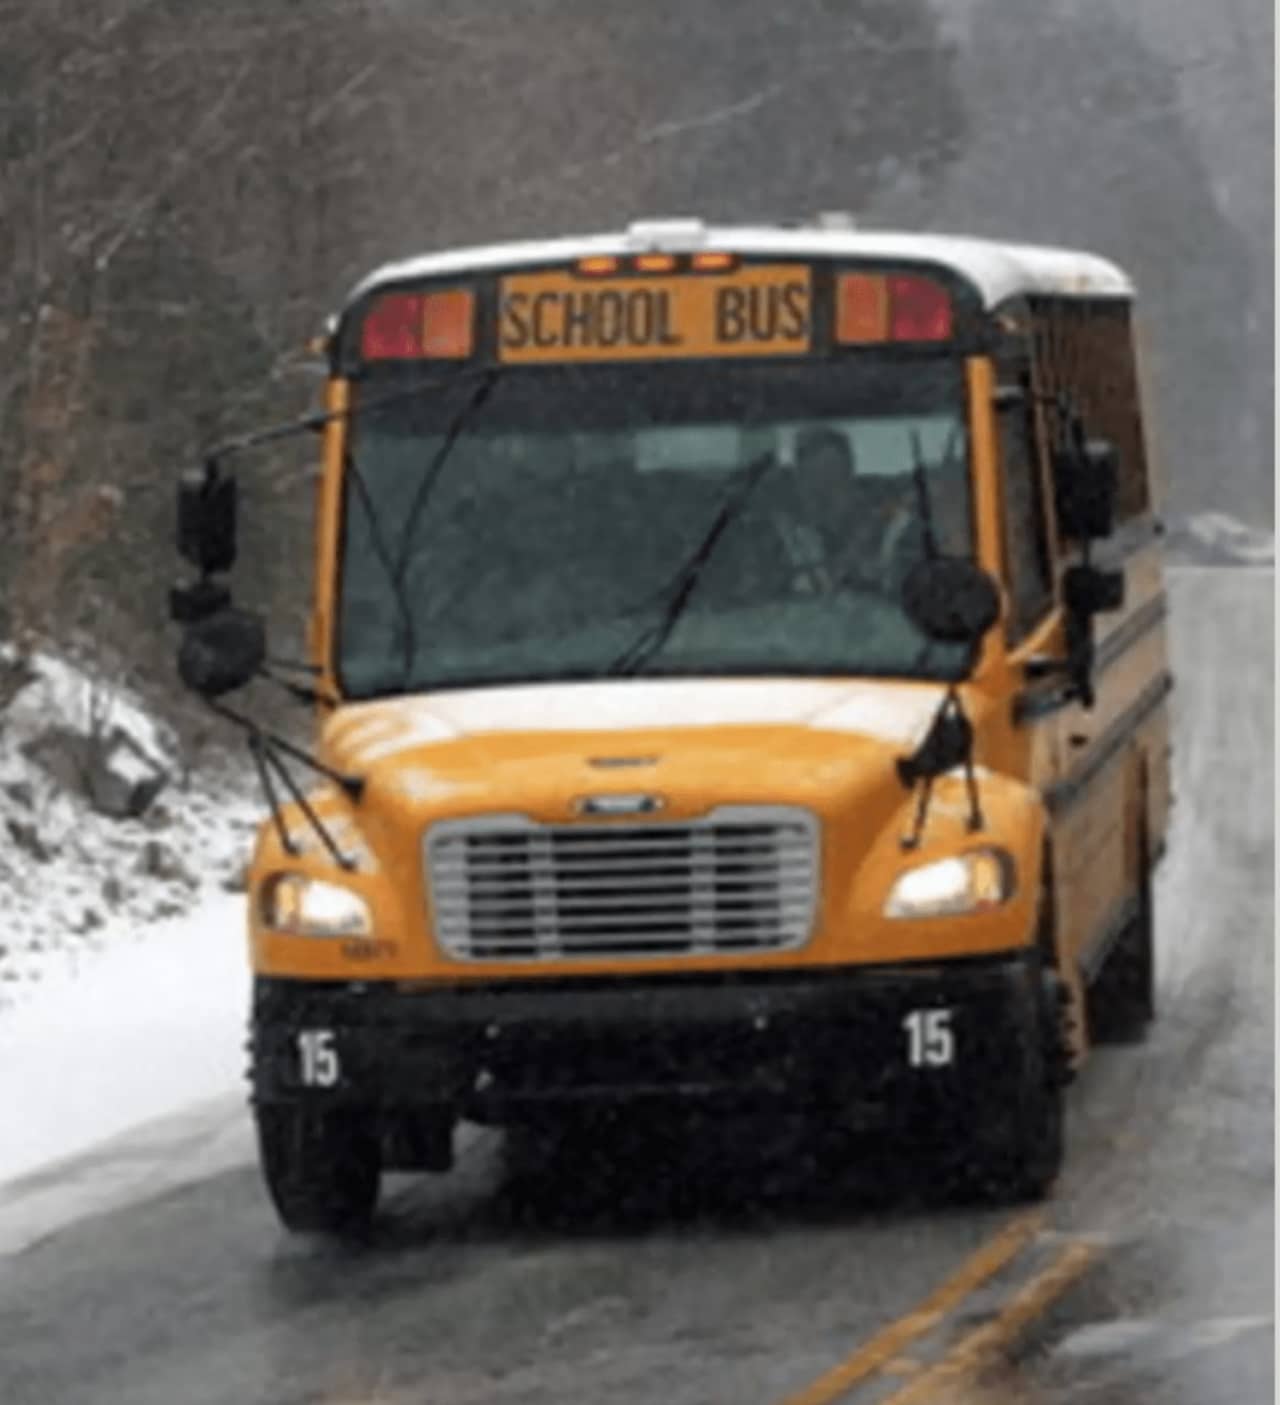 The following schools and school districts in the area have announced closures and delayed openings for Wednesday, March 15 as a result of the Nor'easter.